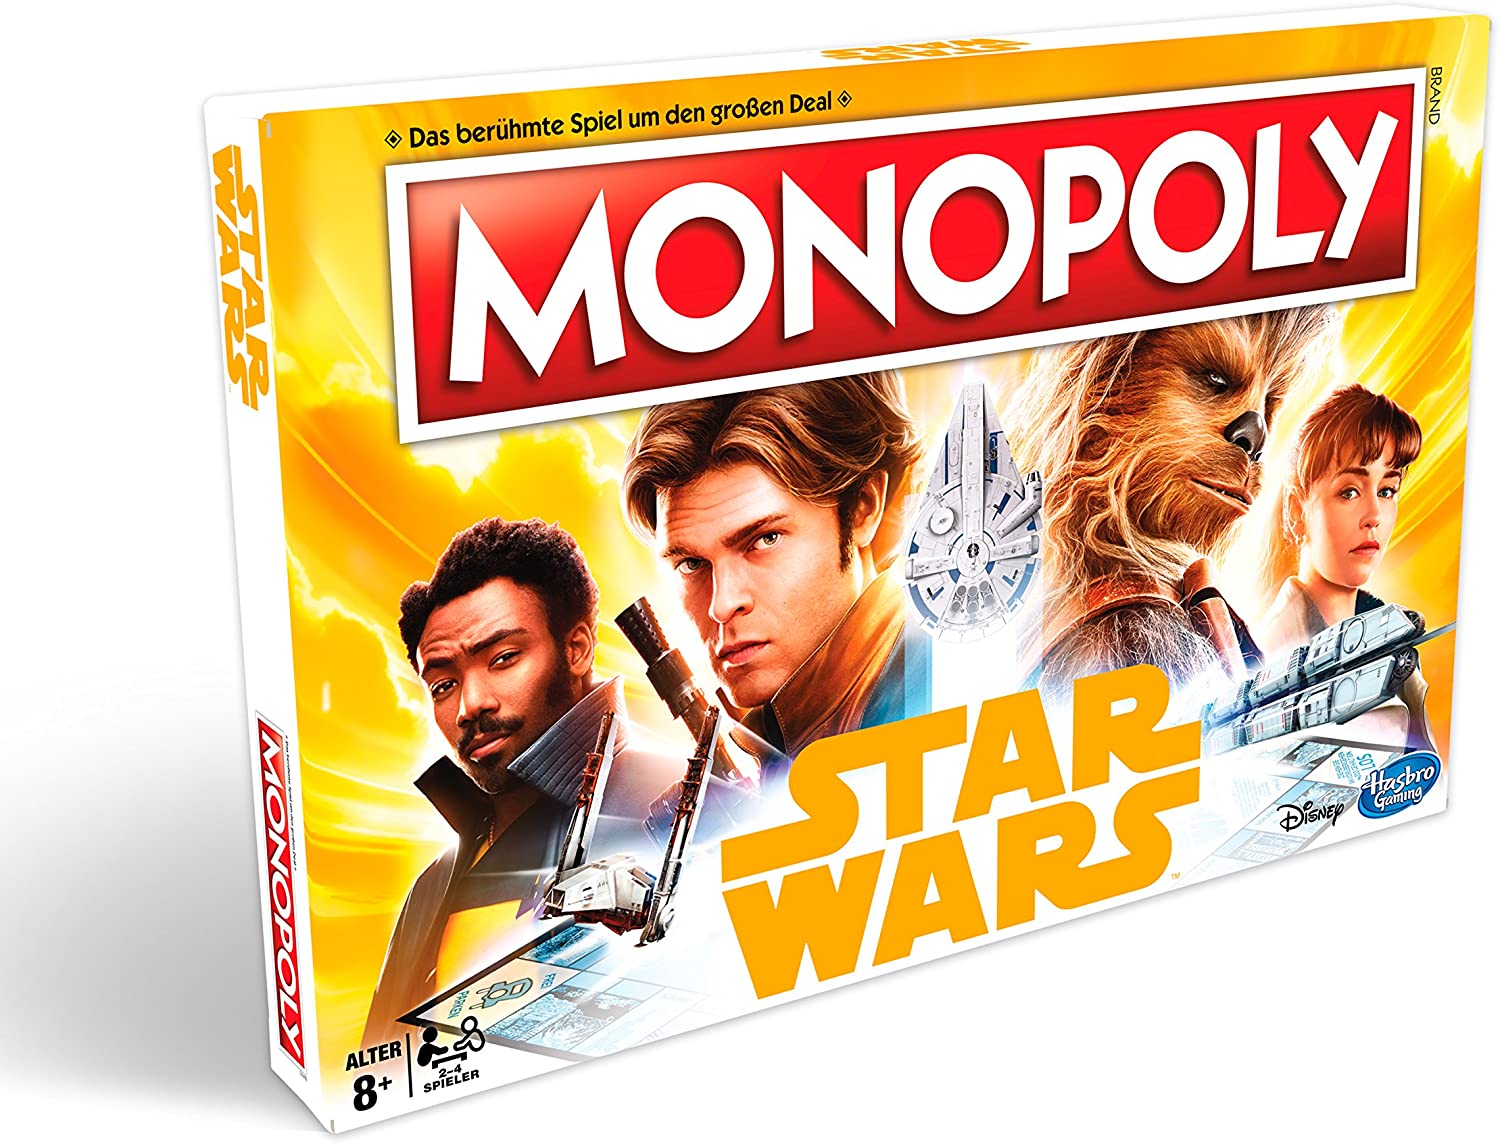 Monopoly - Solo: A Star Wars Story